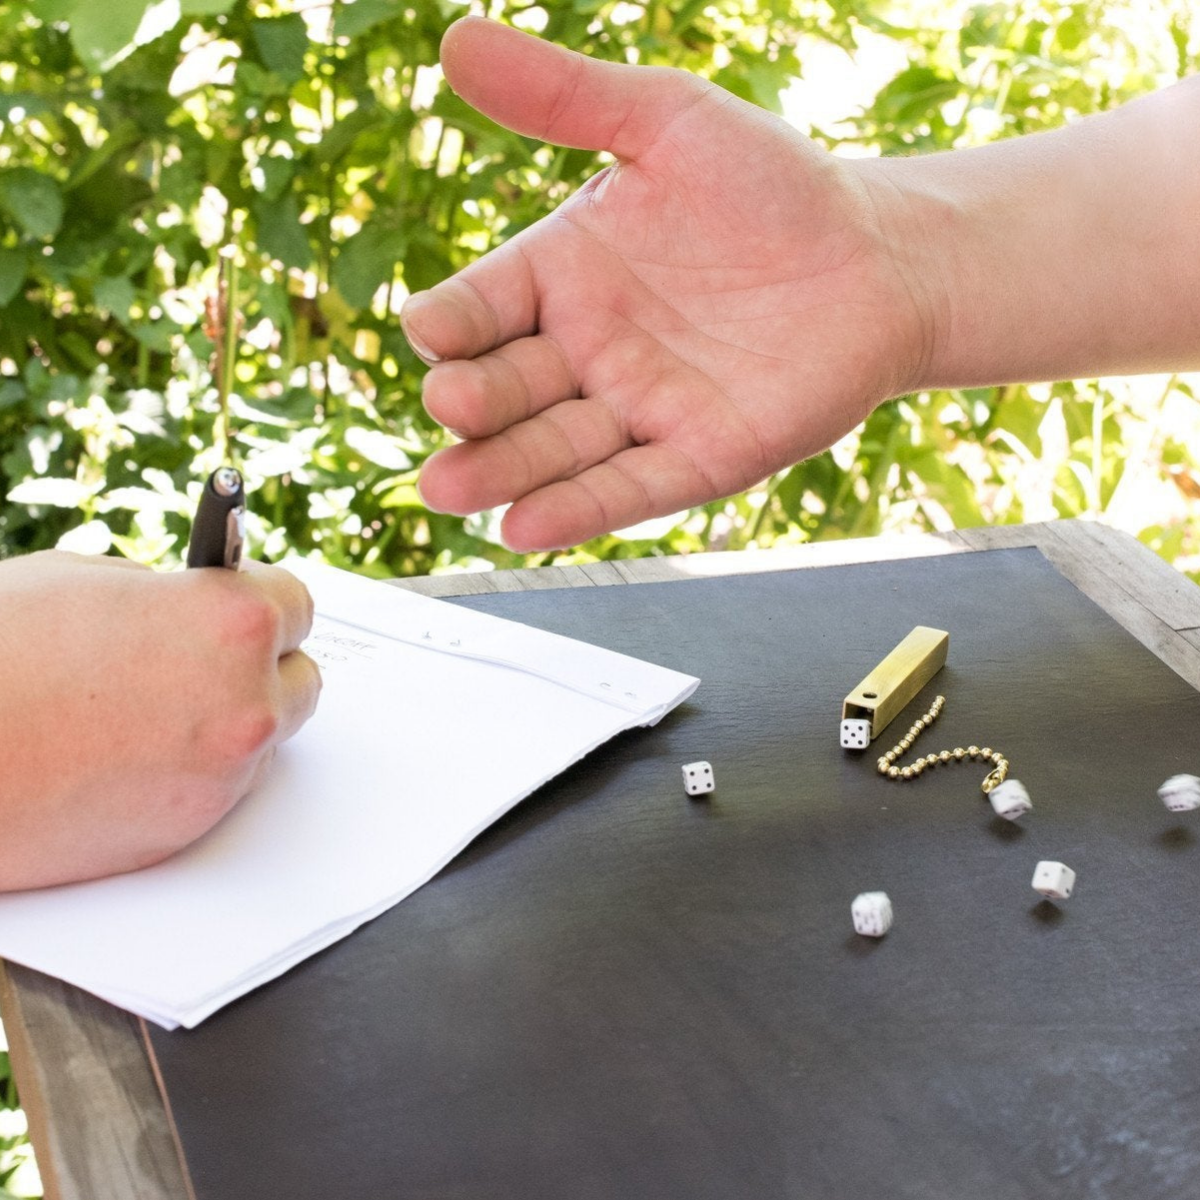 Two people playing dice on a summery day with green bushes in the background. One person is rolling six small travel dice and the other person is keeping score with a pen and paper. The brass storage tube is on the table.